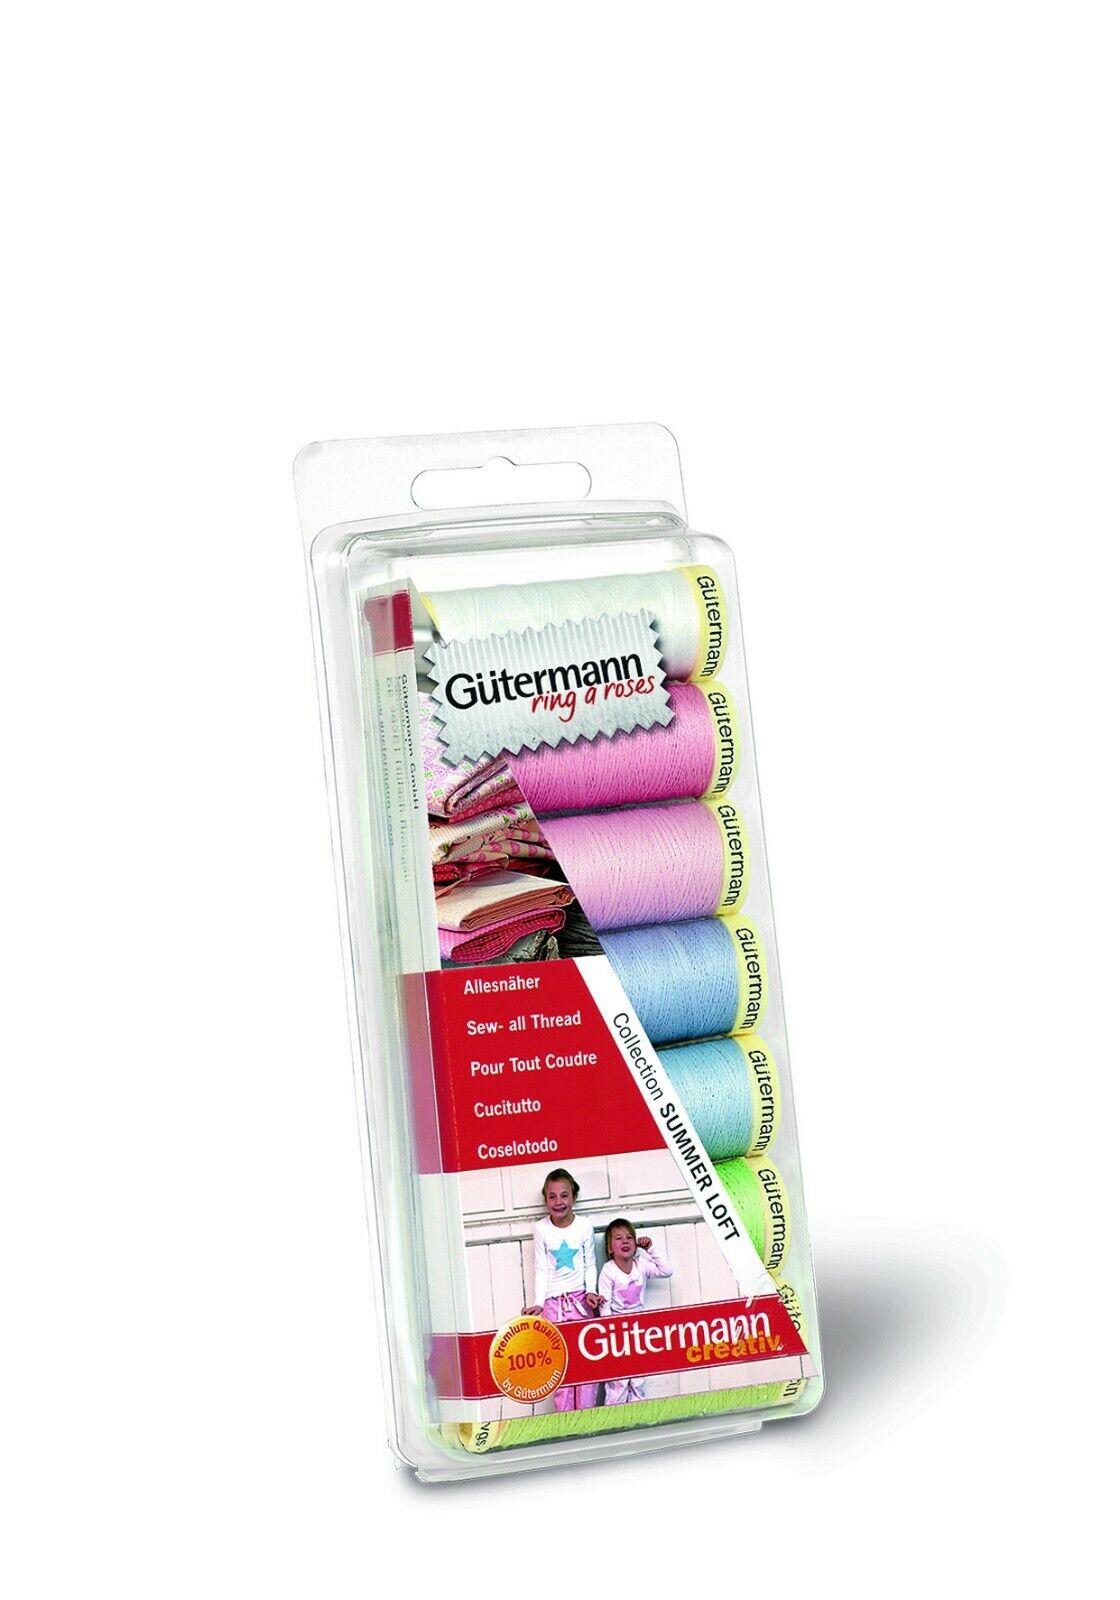 Gutermann Sewing Thread, Set of 10 Pastel Colors, Polyester Sewing